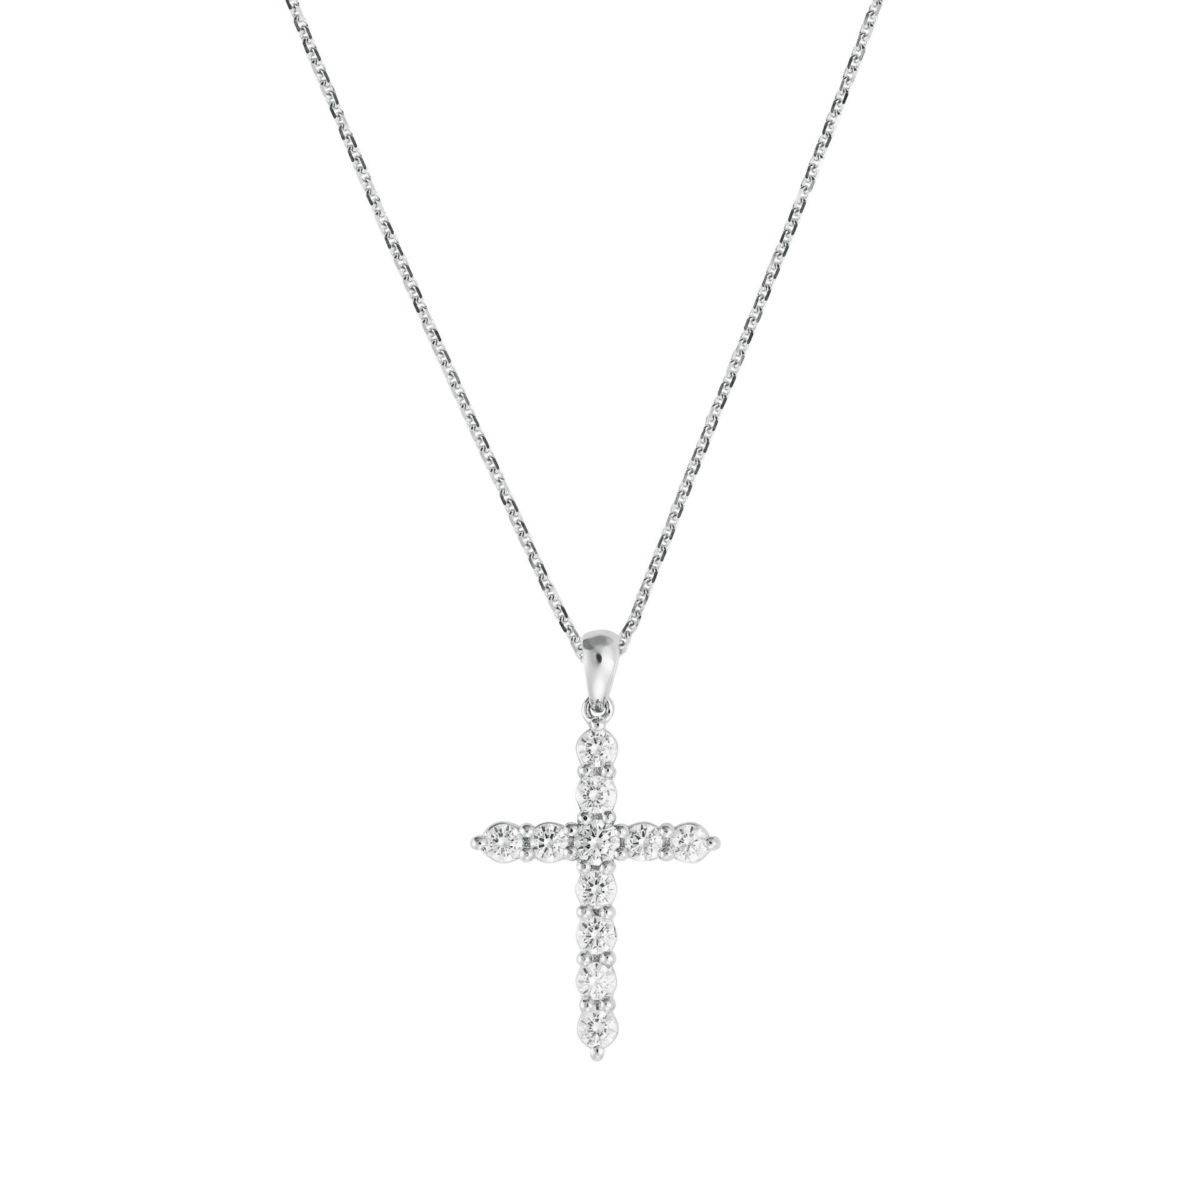 The Keepers - Cross Pendant